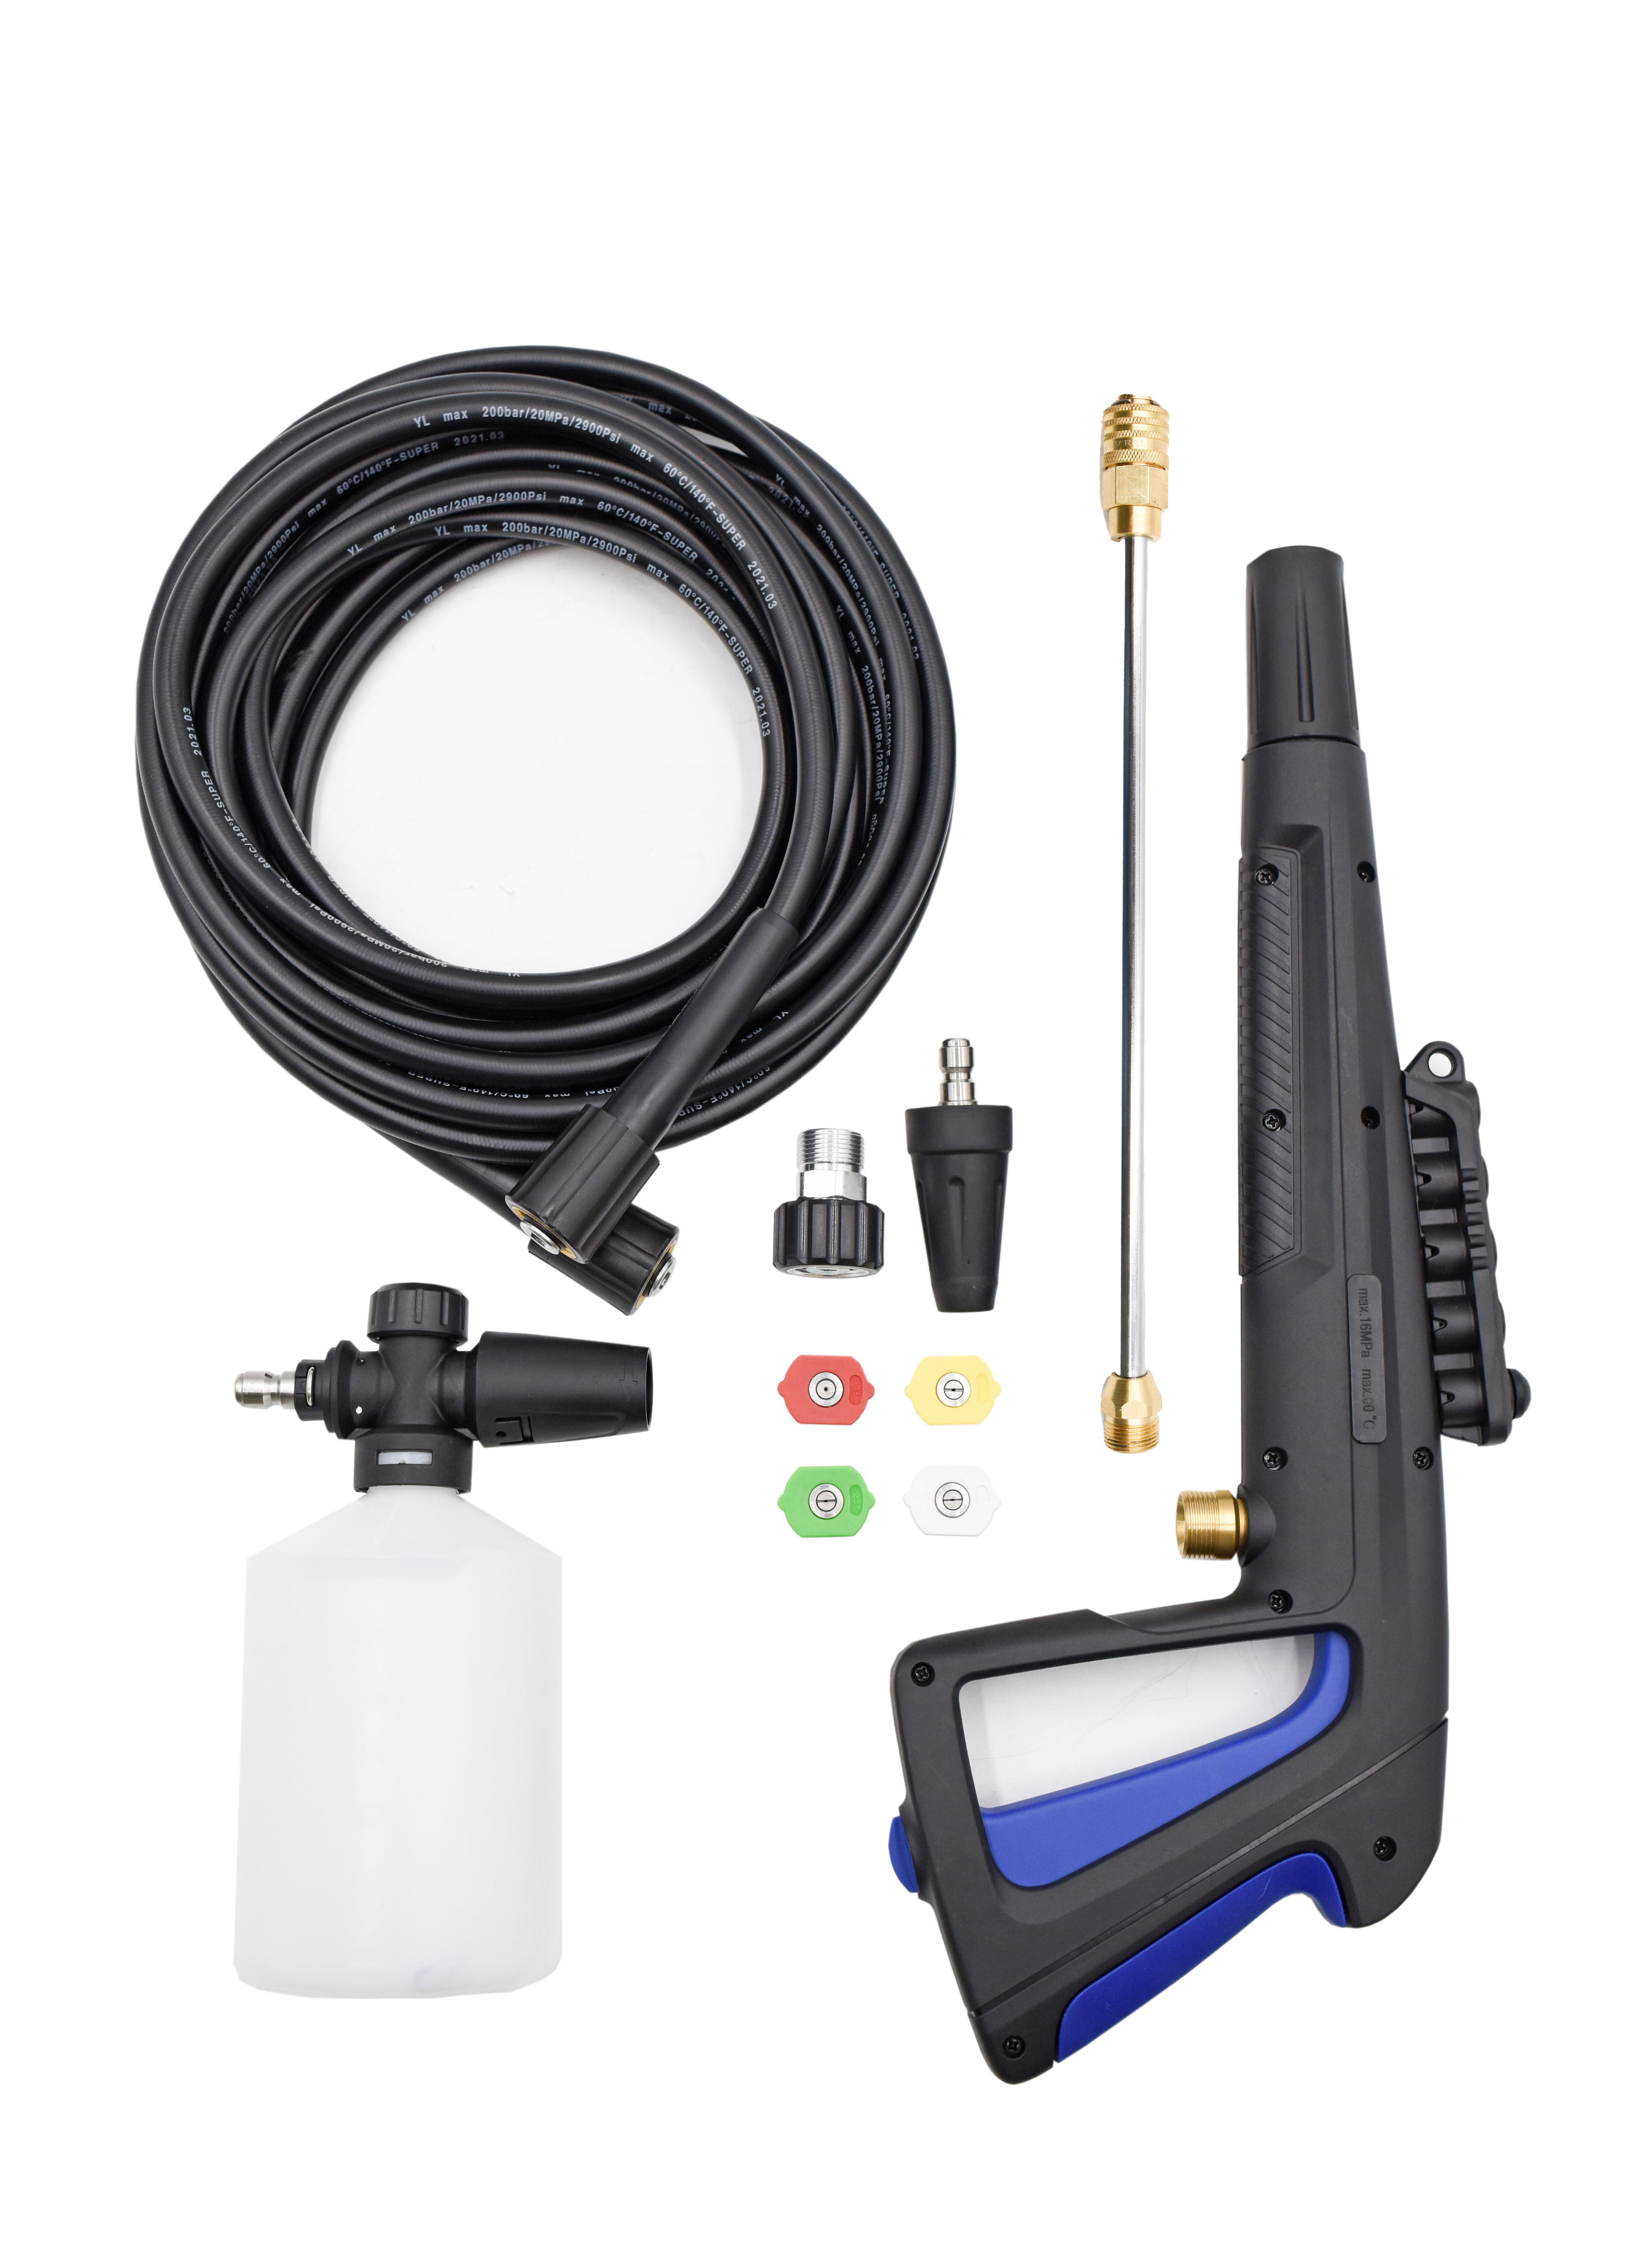 Can I use this kit to replace my ar383 pressure washer orignal gun?  I prefer the quick connect setup.